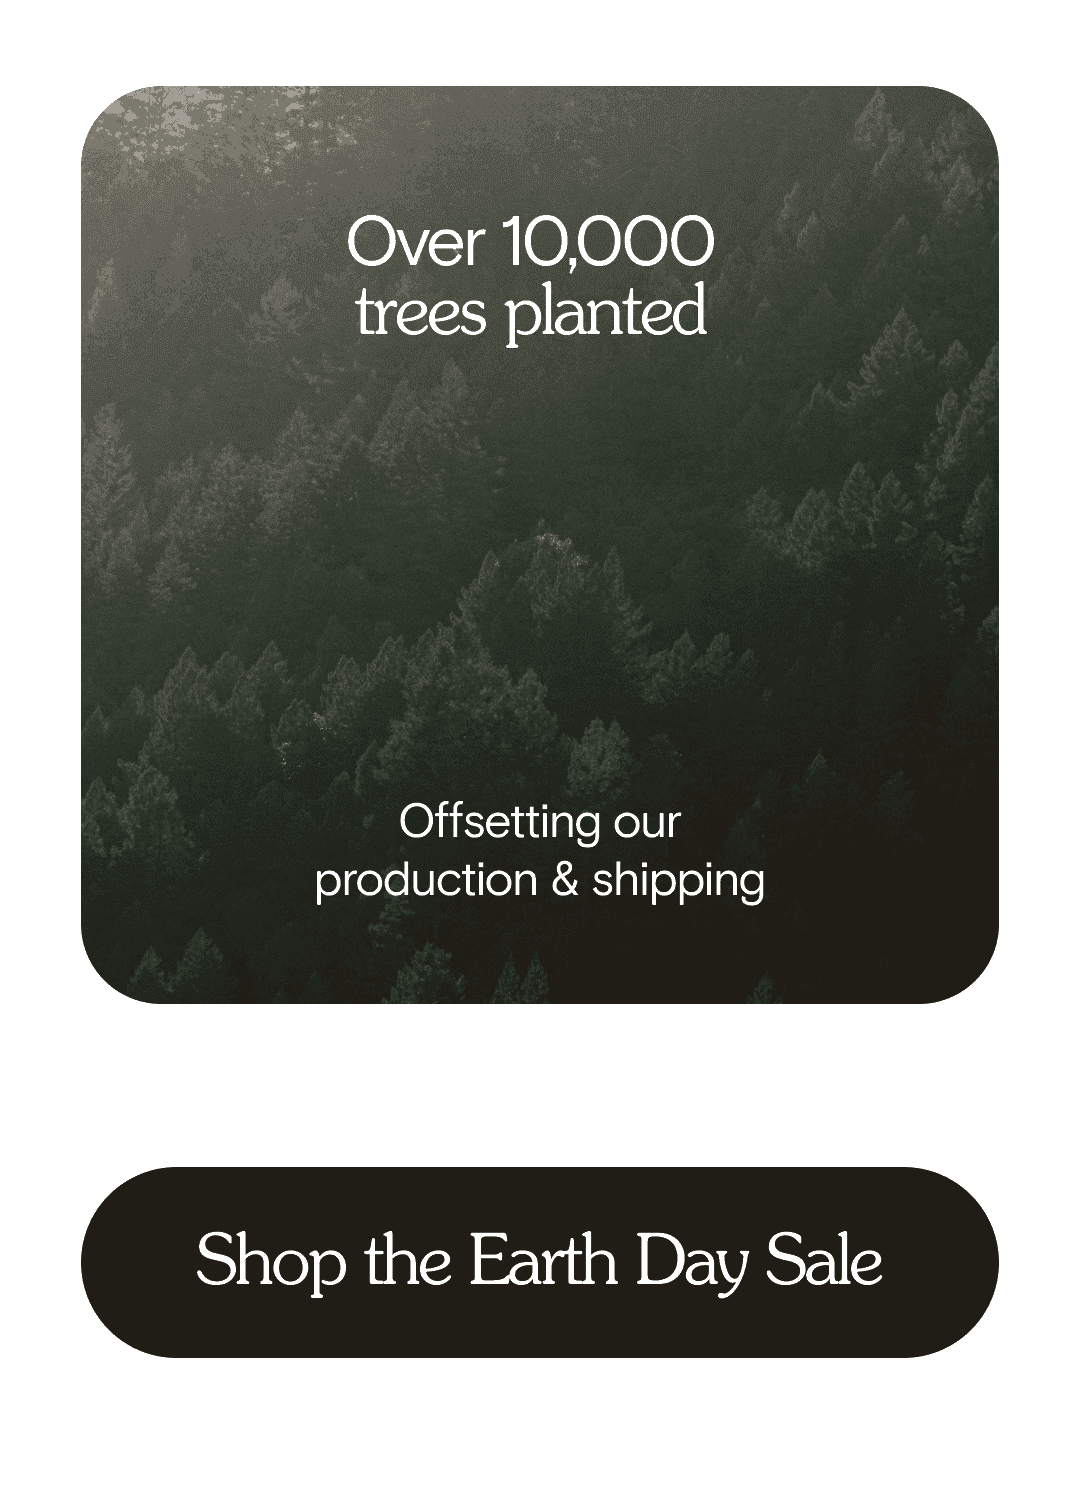 Over 10,000 trees planted. Offsetting our product & shipping. Shop the Earth Day Sale!